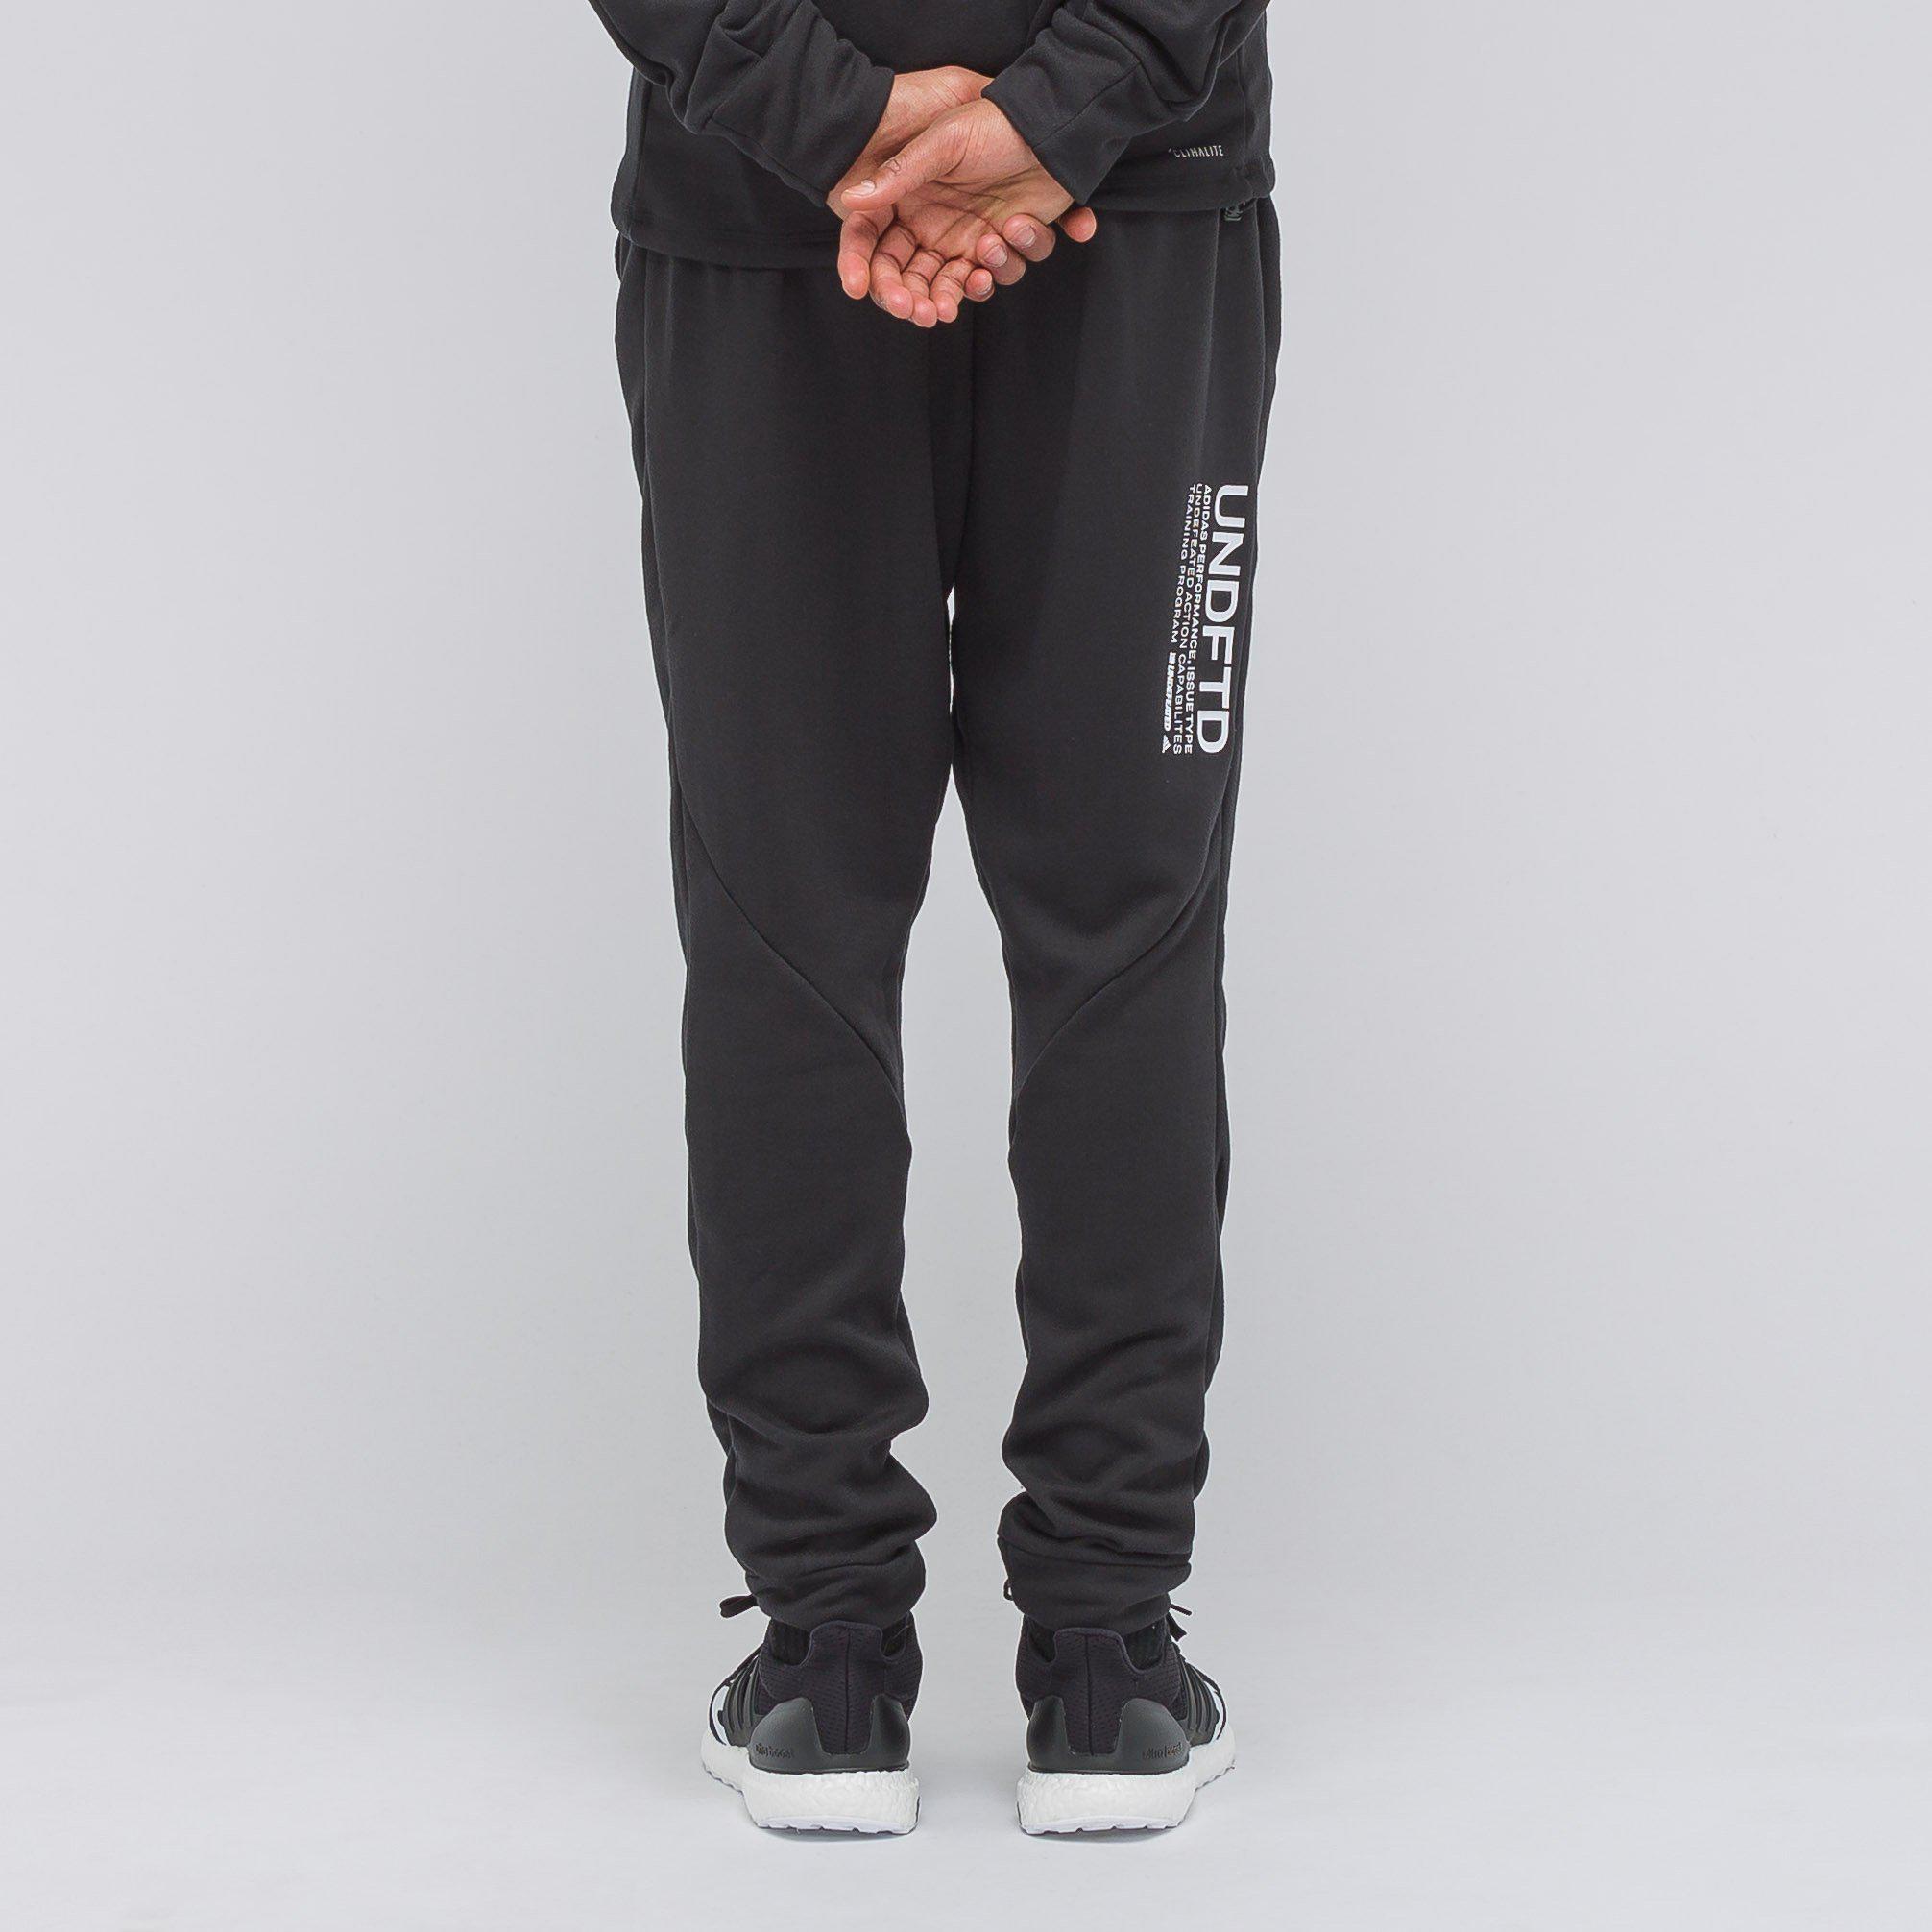 adidas undefeated pants